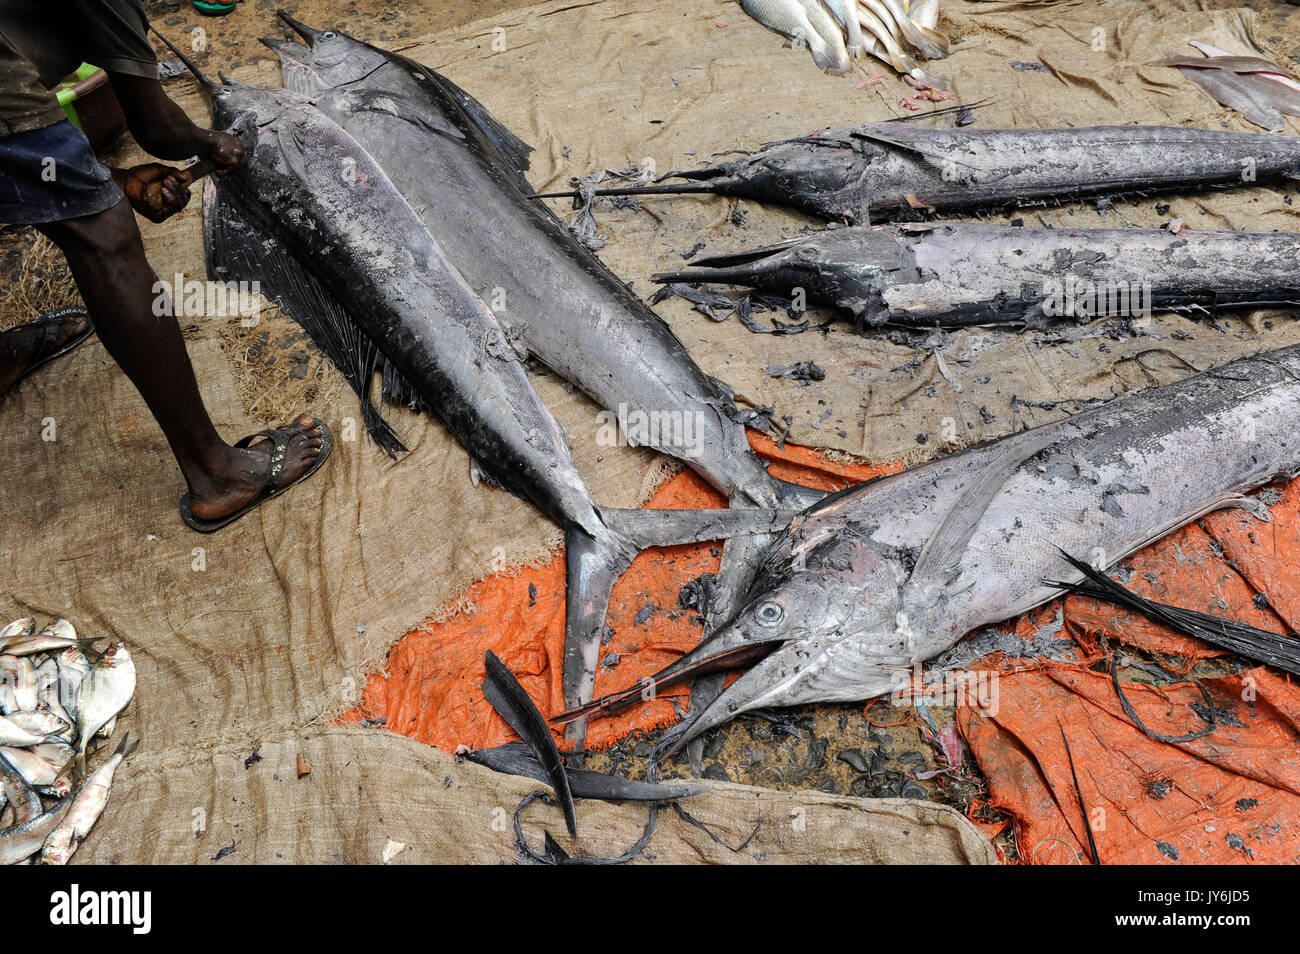 SIERRA LEONE, Tombo, fish market, sword fish, food security and the livelihood of small scale coast fishermen are affected by international big trawler fleet Stock Photo